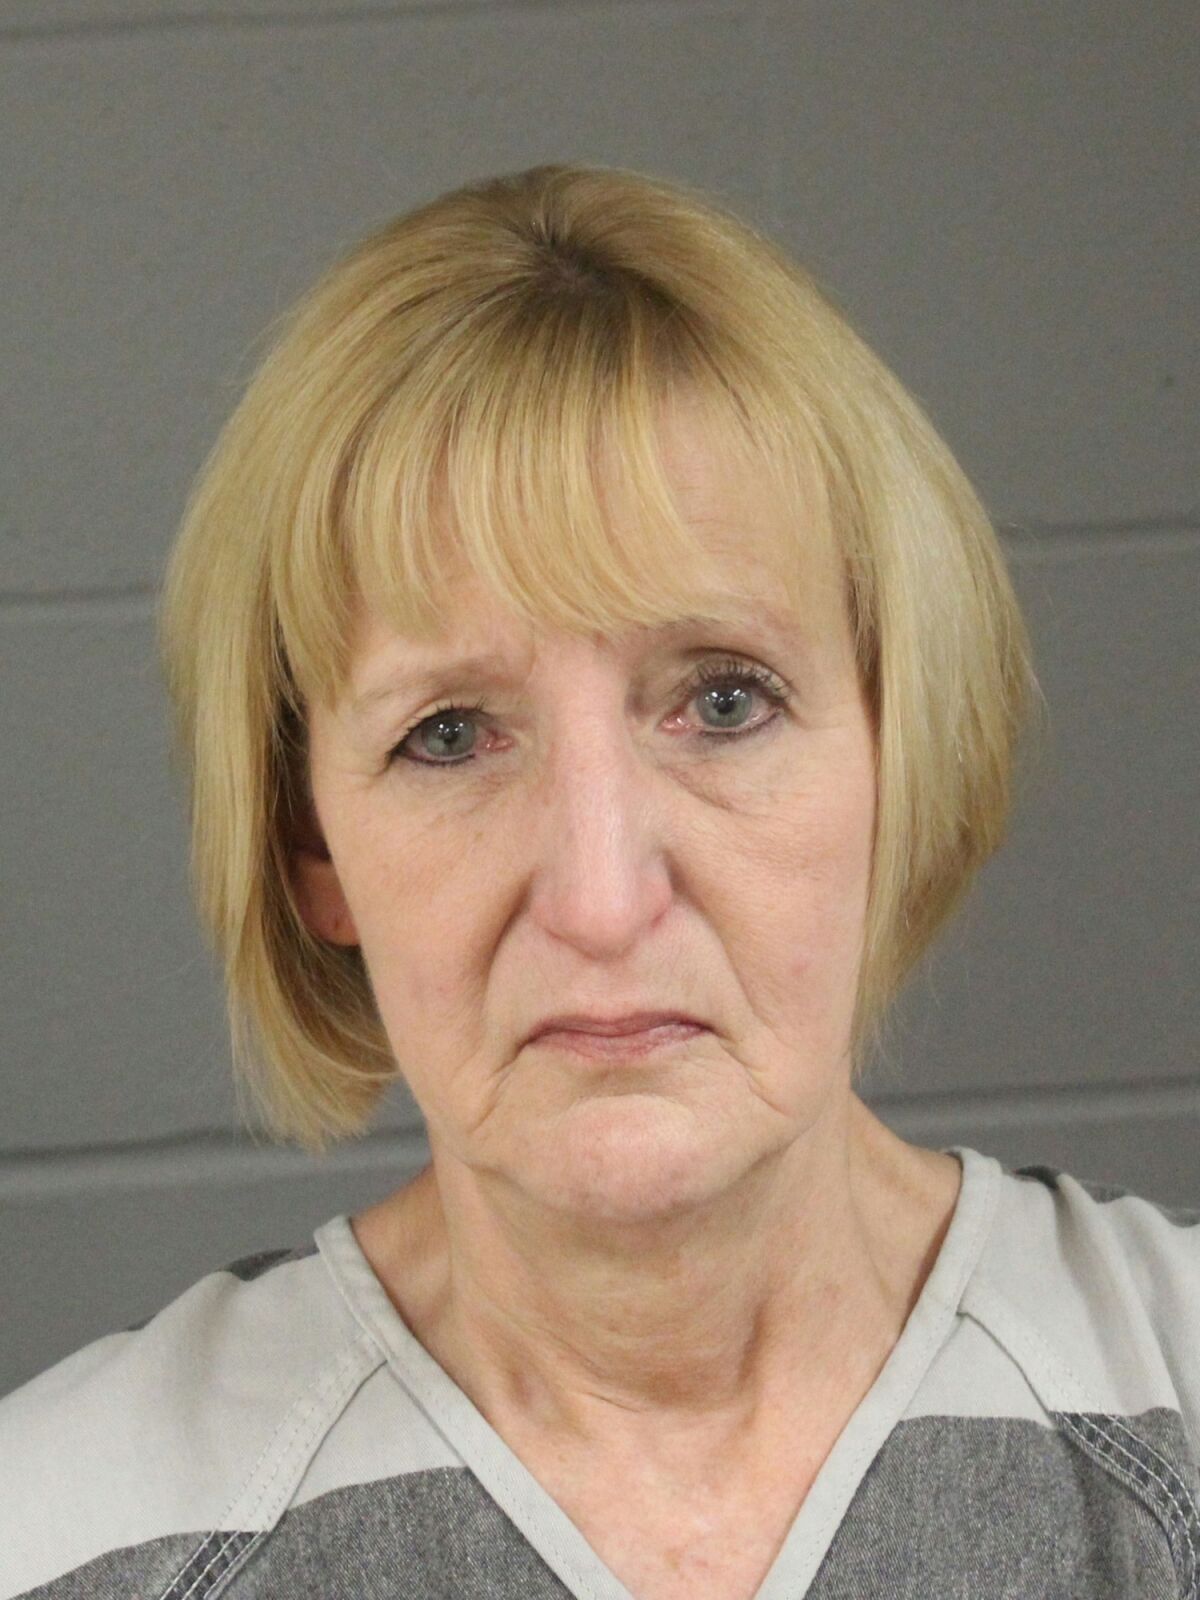 FILE - This March 8, 2019 booking photo released by Minnehaha County, S.D., Jail shows Theresa Rose Bentaas. Bentaas, who was sentenced in 2021 to 10 years in prison for the 1981 unsolved death of her infant son, was granted parole at a hearing Thursday, March 17, 2022, in Sioux Falls, S.D. (Minnehaha County Jail via KELO via AP, File)